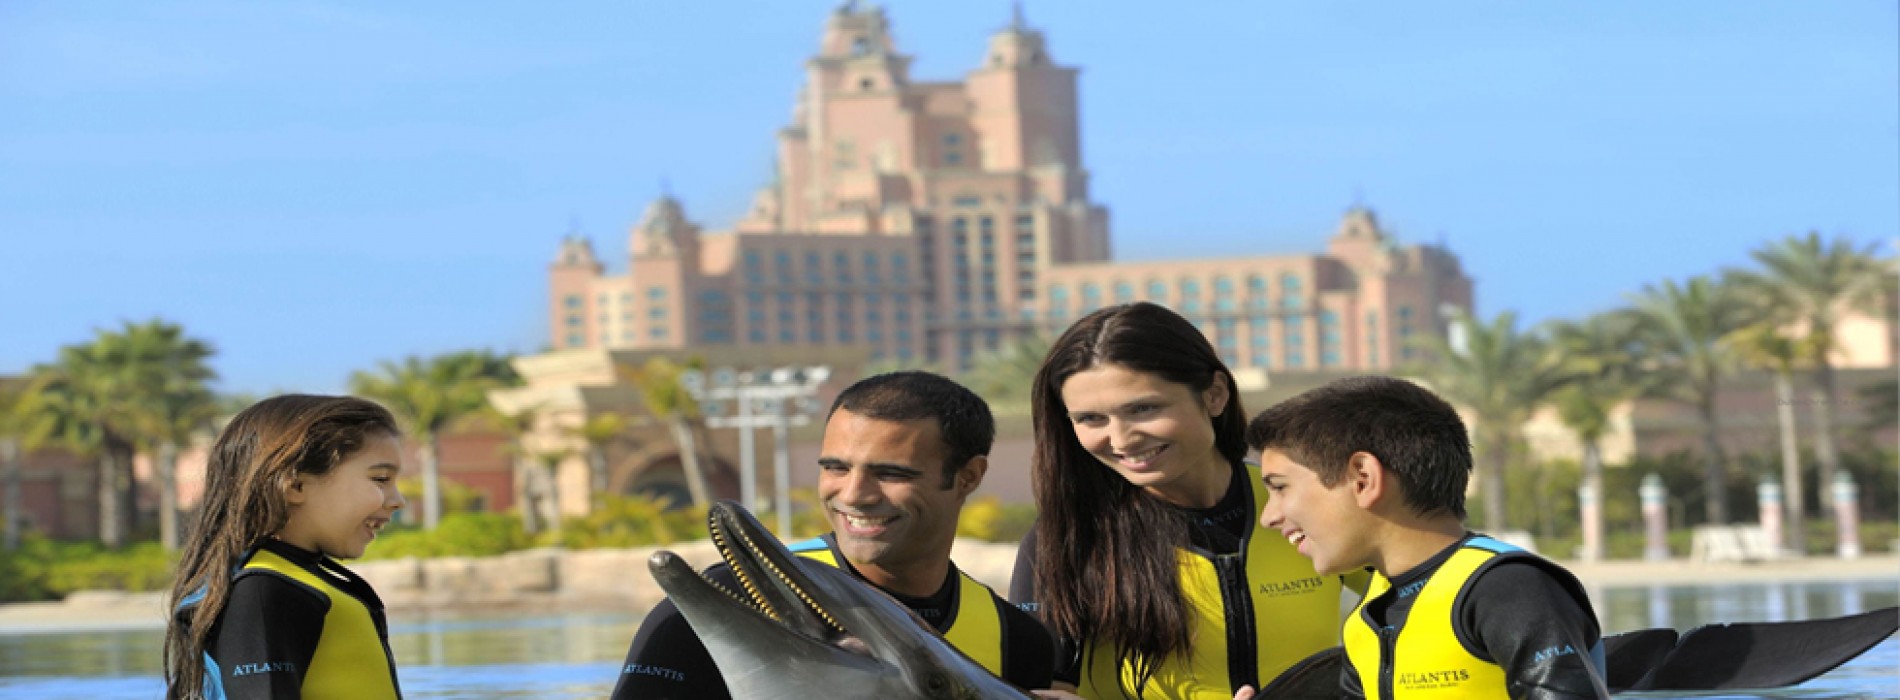 Atlantis, The Palm introduces incredible discounts this Summer